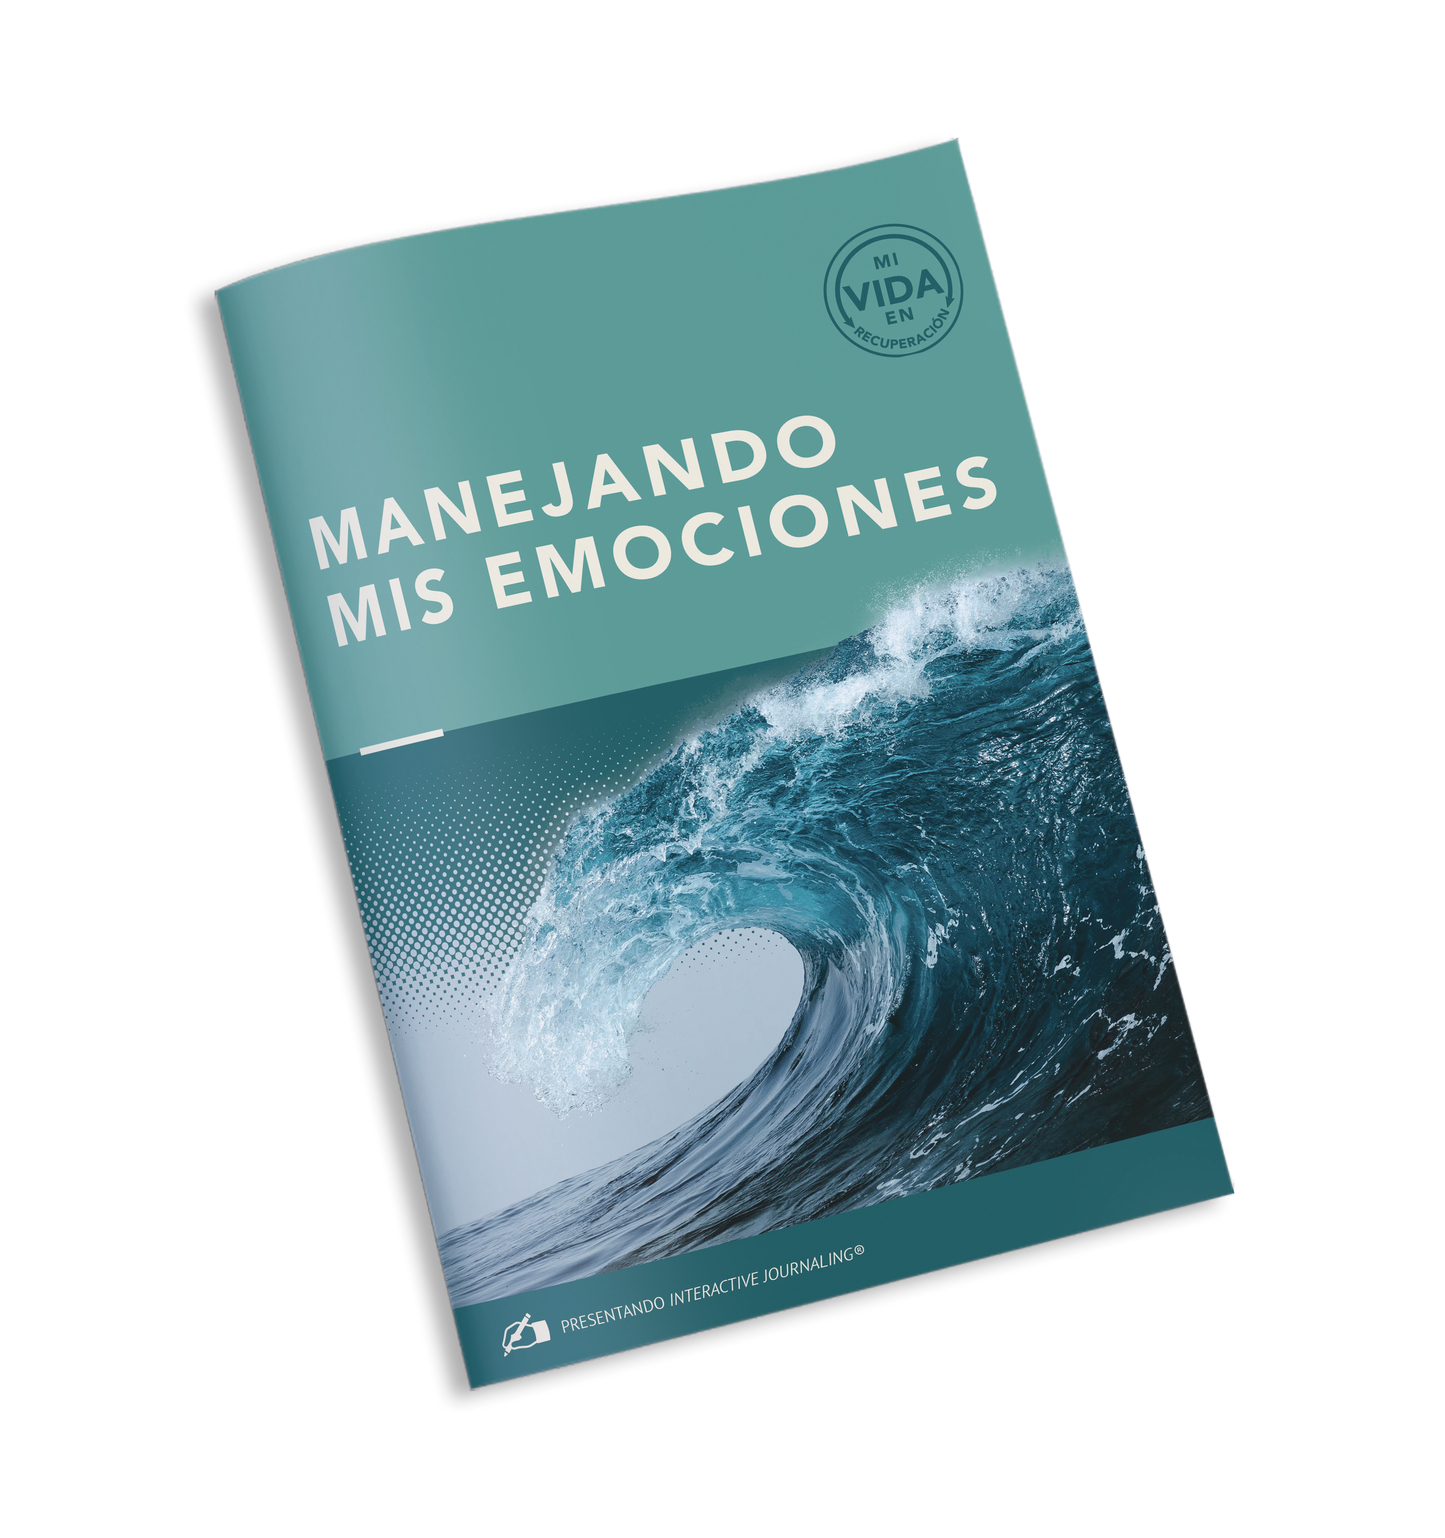 My Life in Recovery - Managing My Emotions - SPANISH